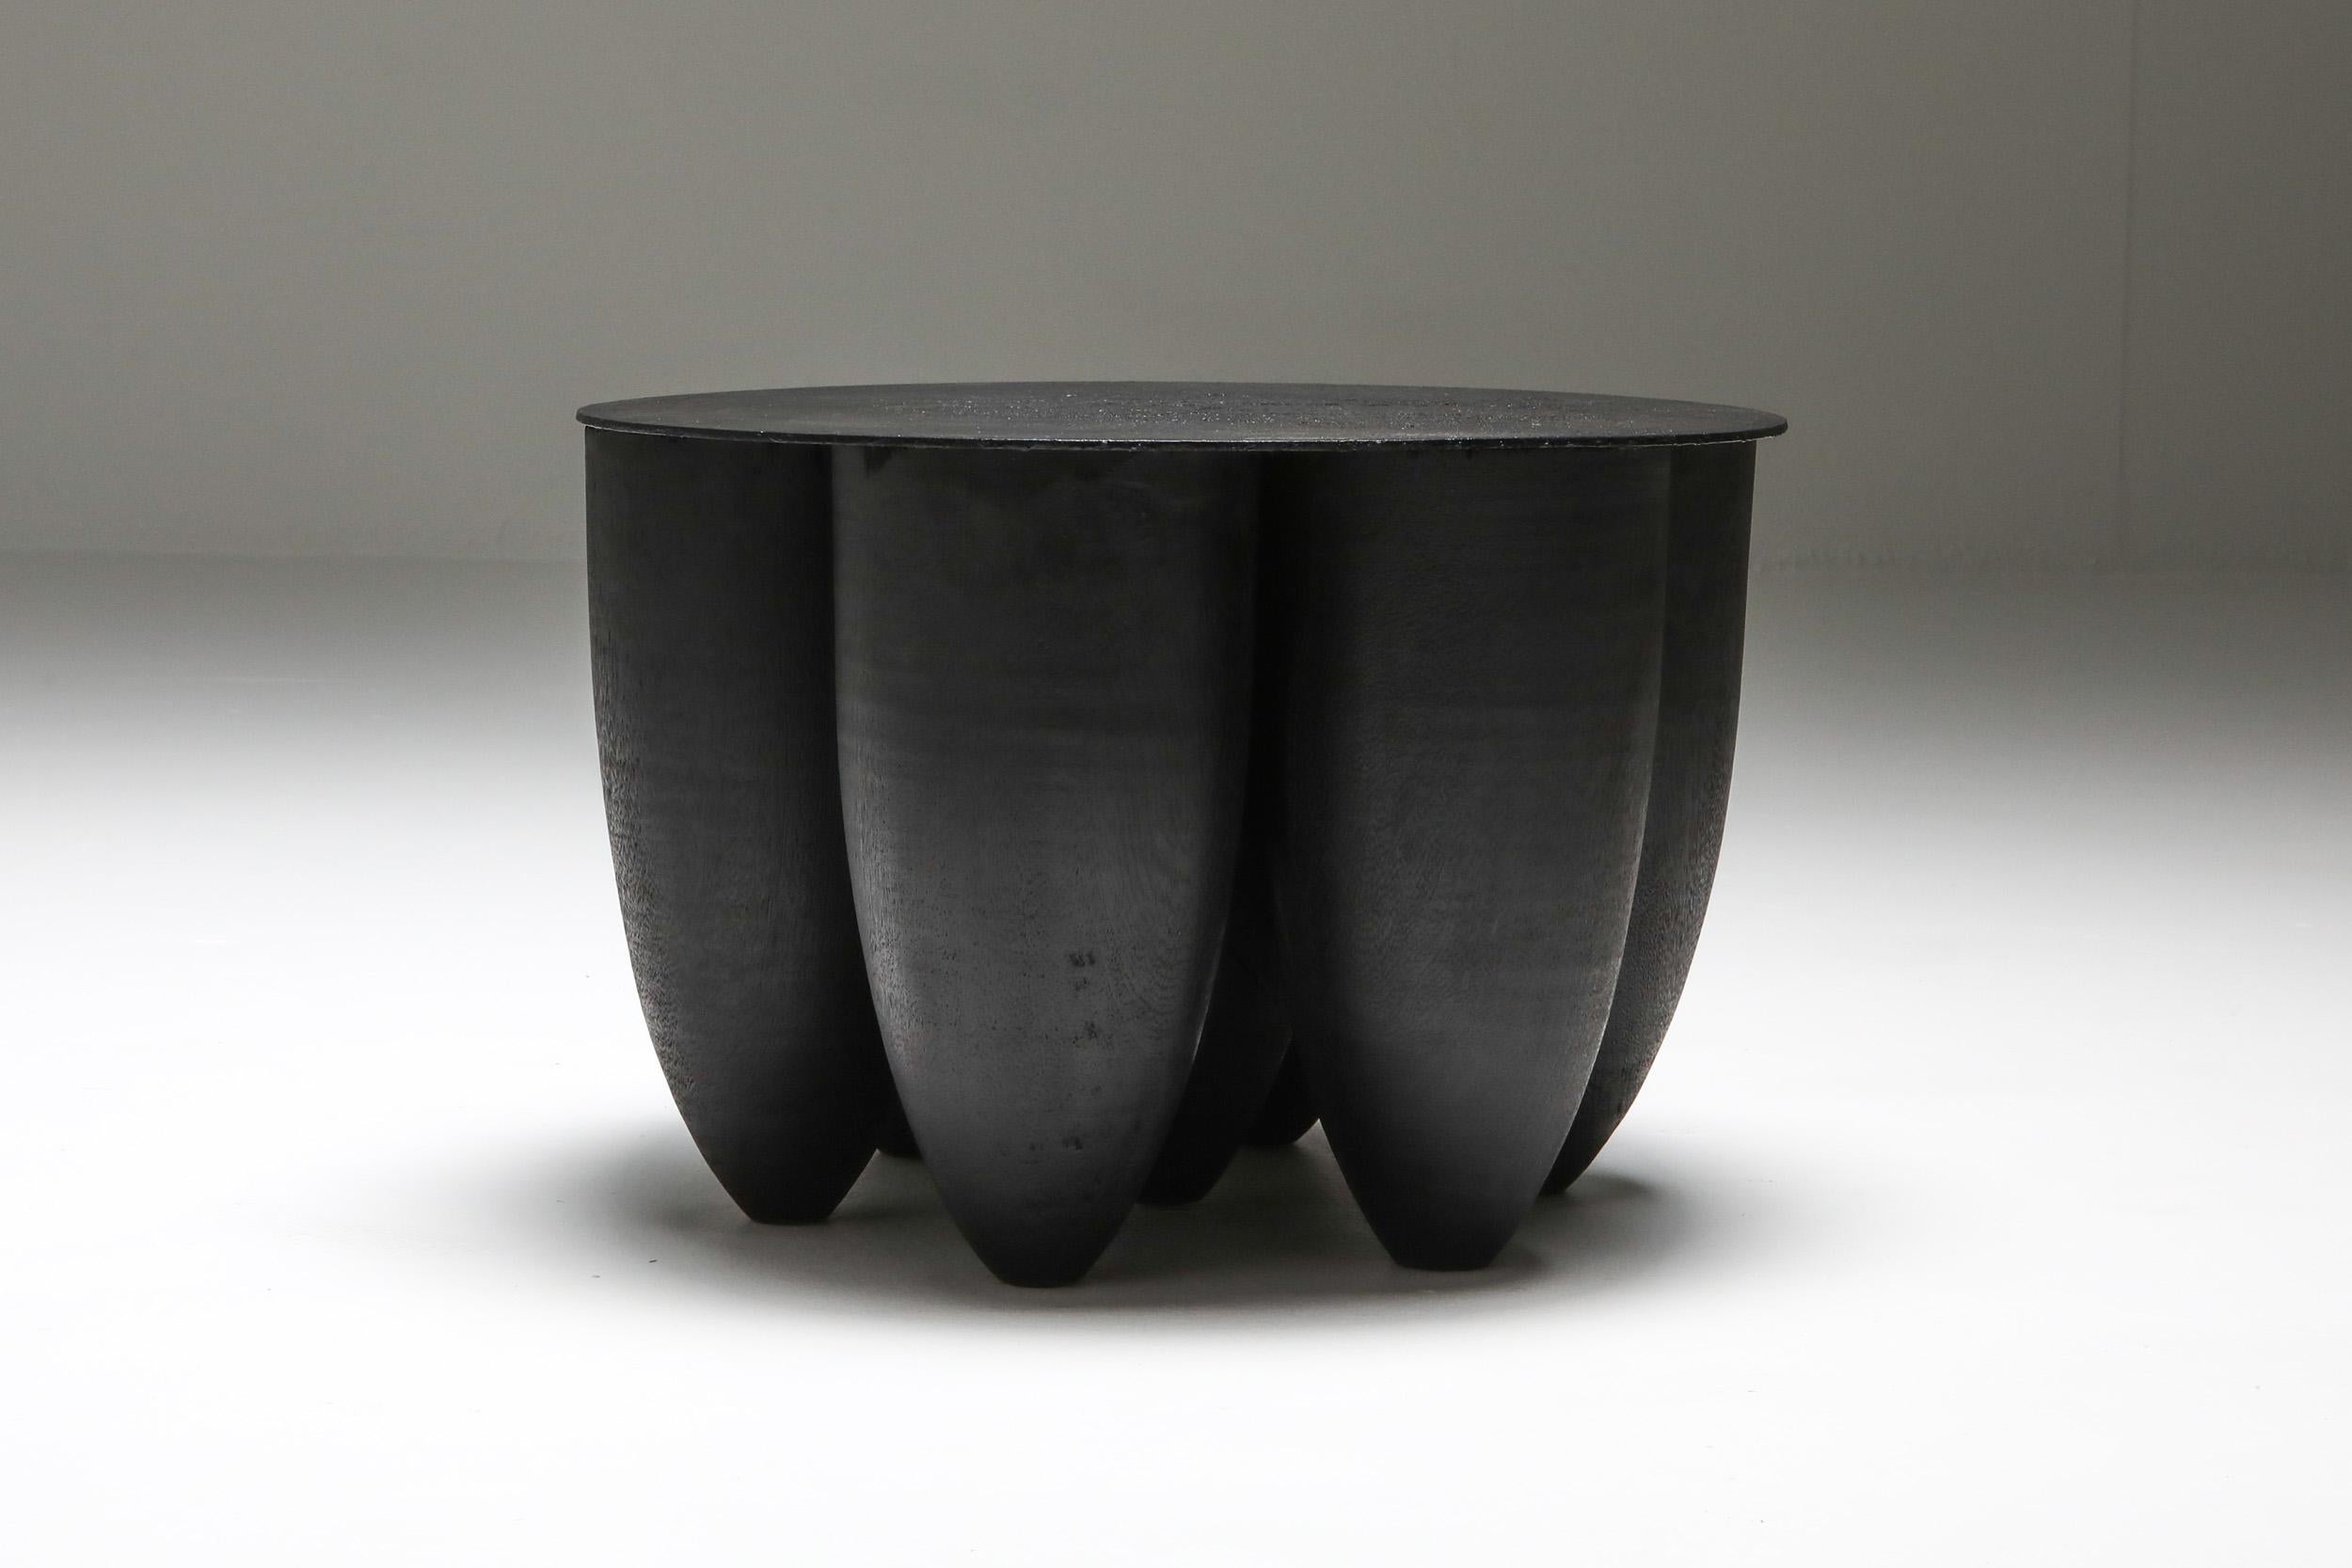 Arno Declercq; Belgian Design; Handcrafted

Made in burned and waxed Iroko wood and burned steel.
45 cm wide x 45 cm deep x 30 cm high / 17.7” wide x 17.7” deep x 12” high

Belgian designer and art dealer, born in 1994, who makes bespoke